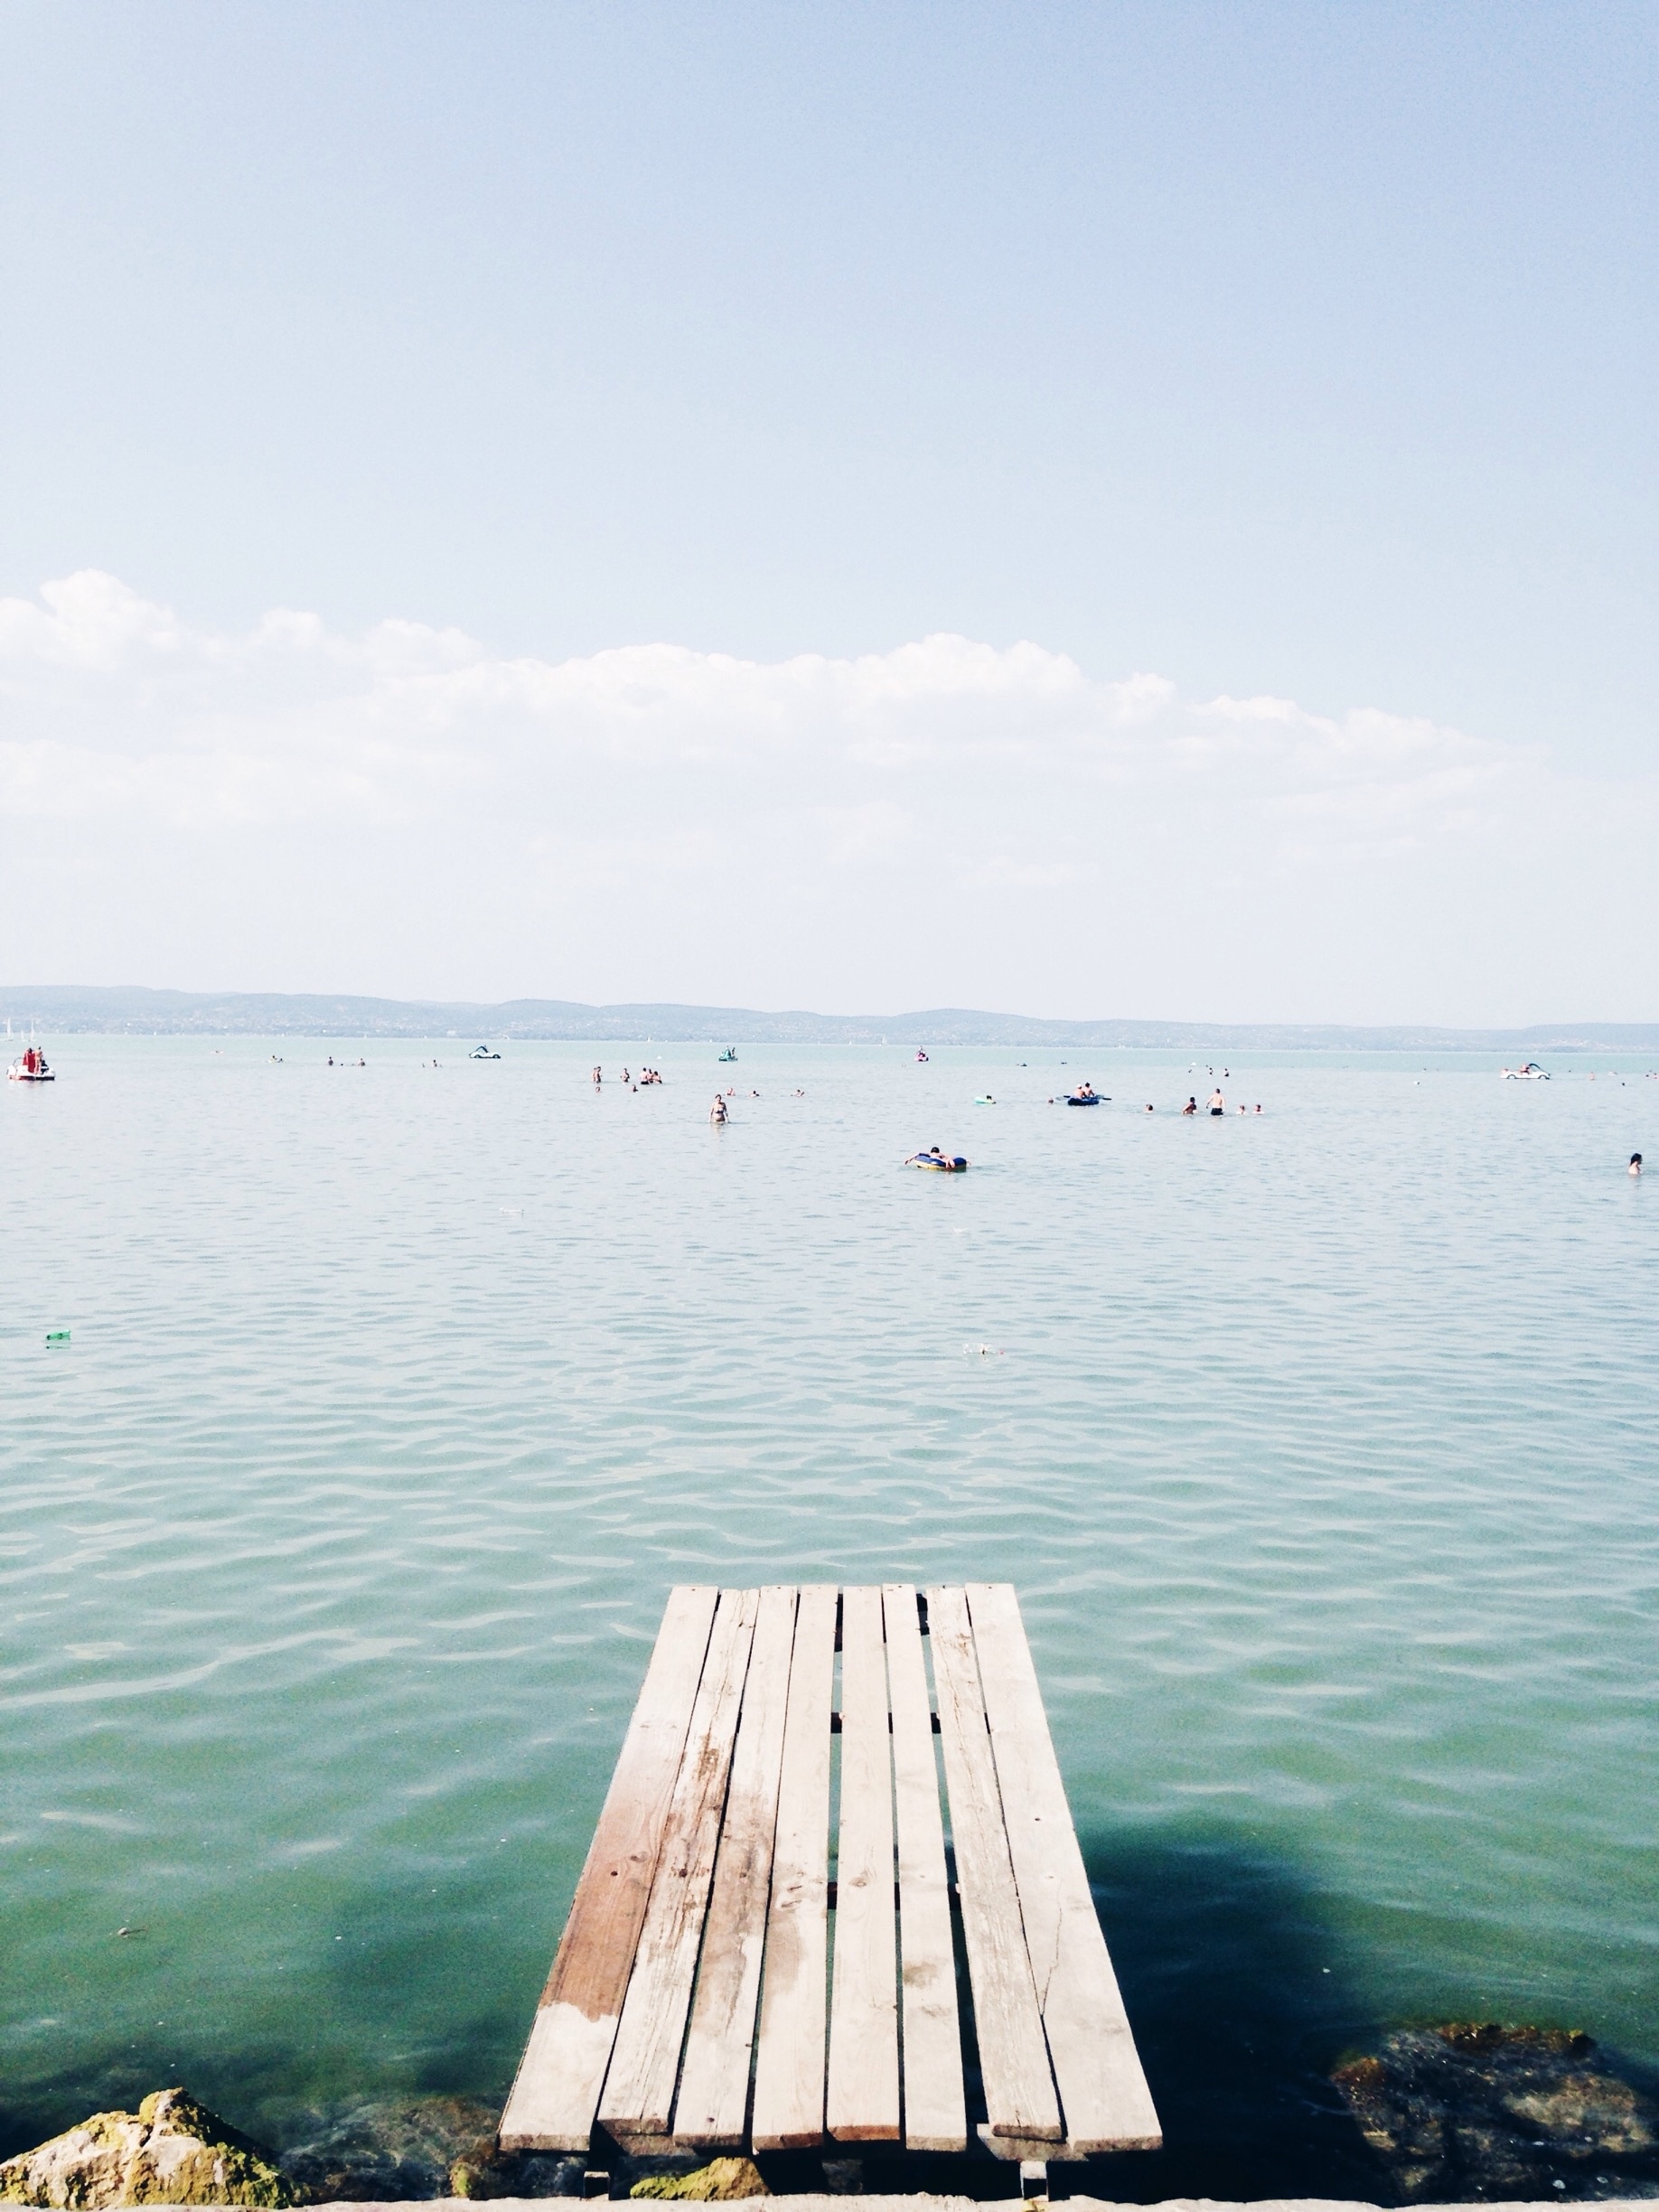 Visiting the Balaton lake in Hungary. A special lake where you can walk more than 500m without swimming and the deepest point is only 3m. It is also one of the biggest lakes in Europe. #travel #lake #hungary